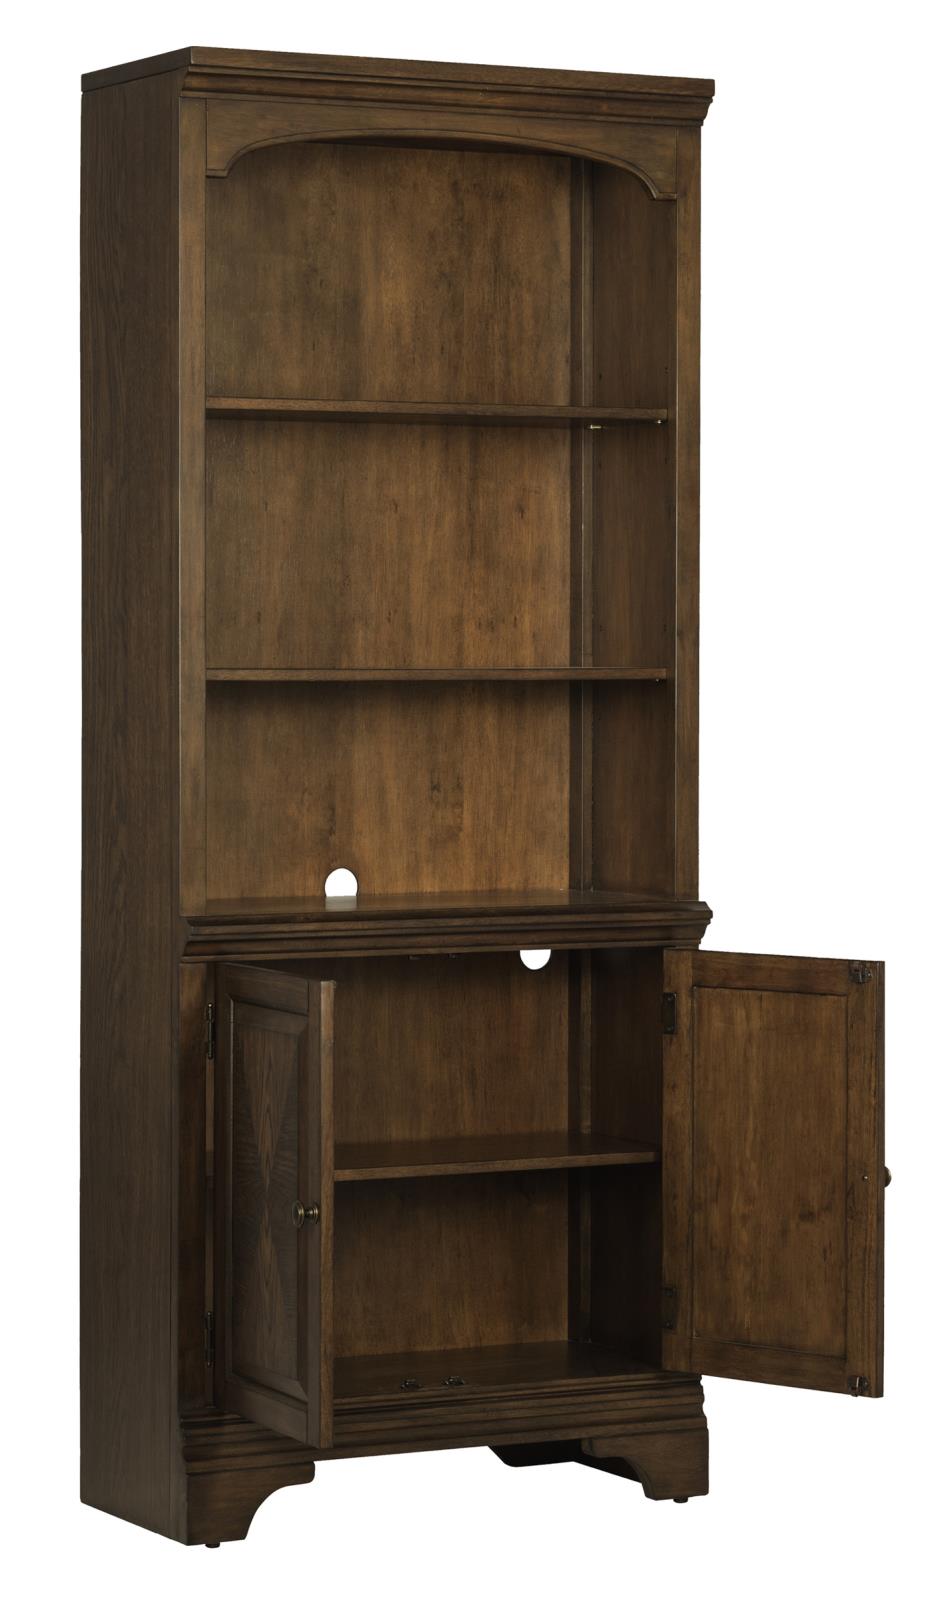 Hartshill Bookcase with Cabinet Burnished Oak - What A Room